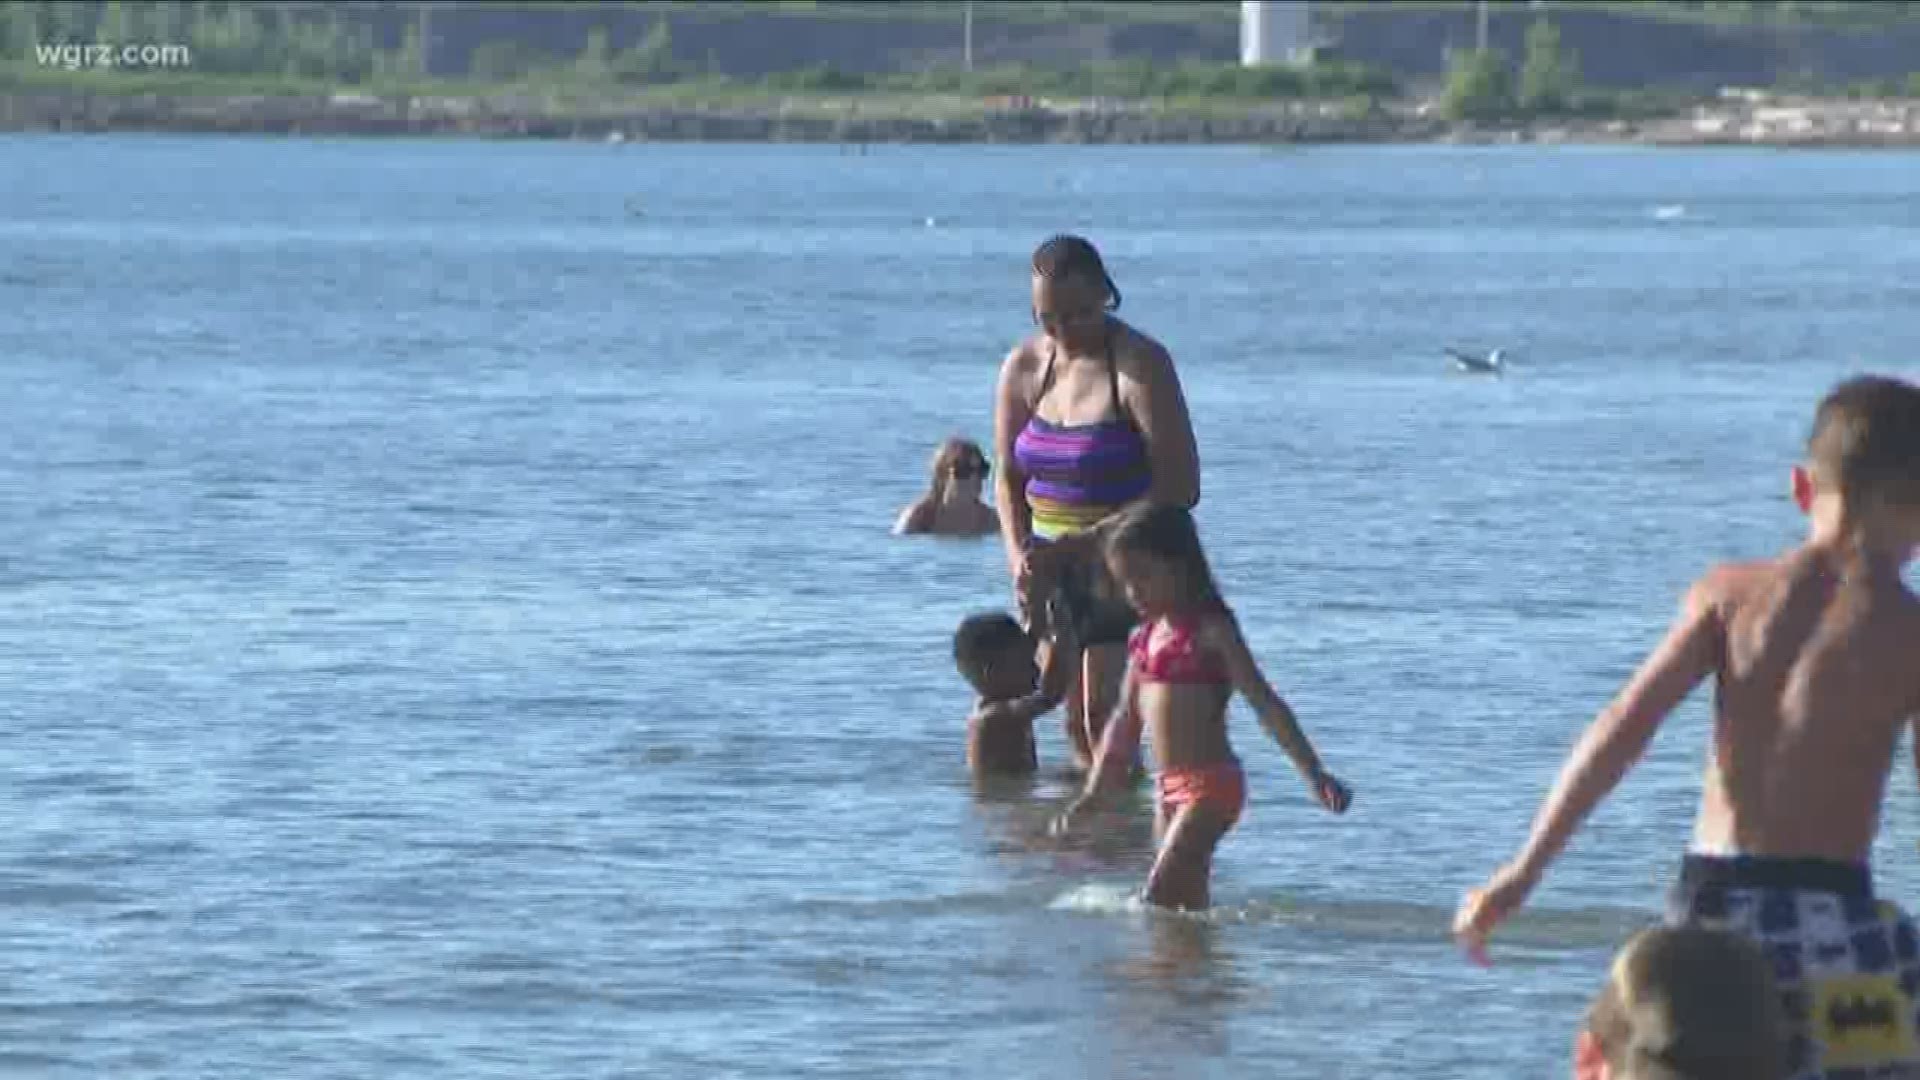 ... and Woodlawn Beach was second worst in the state with only 55-percent of the days safe for swimming.